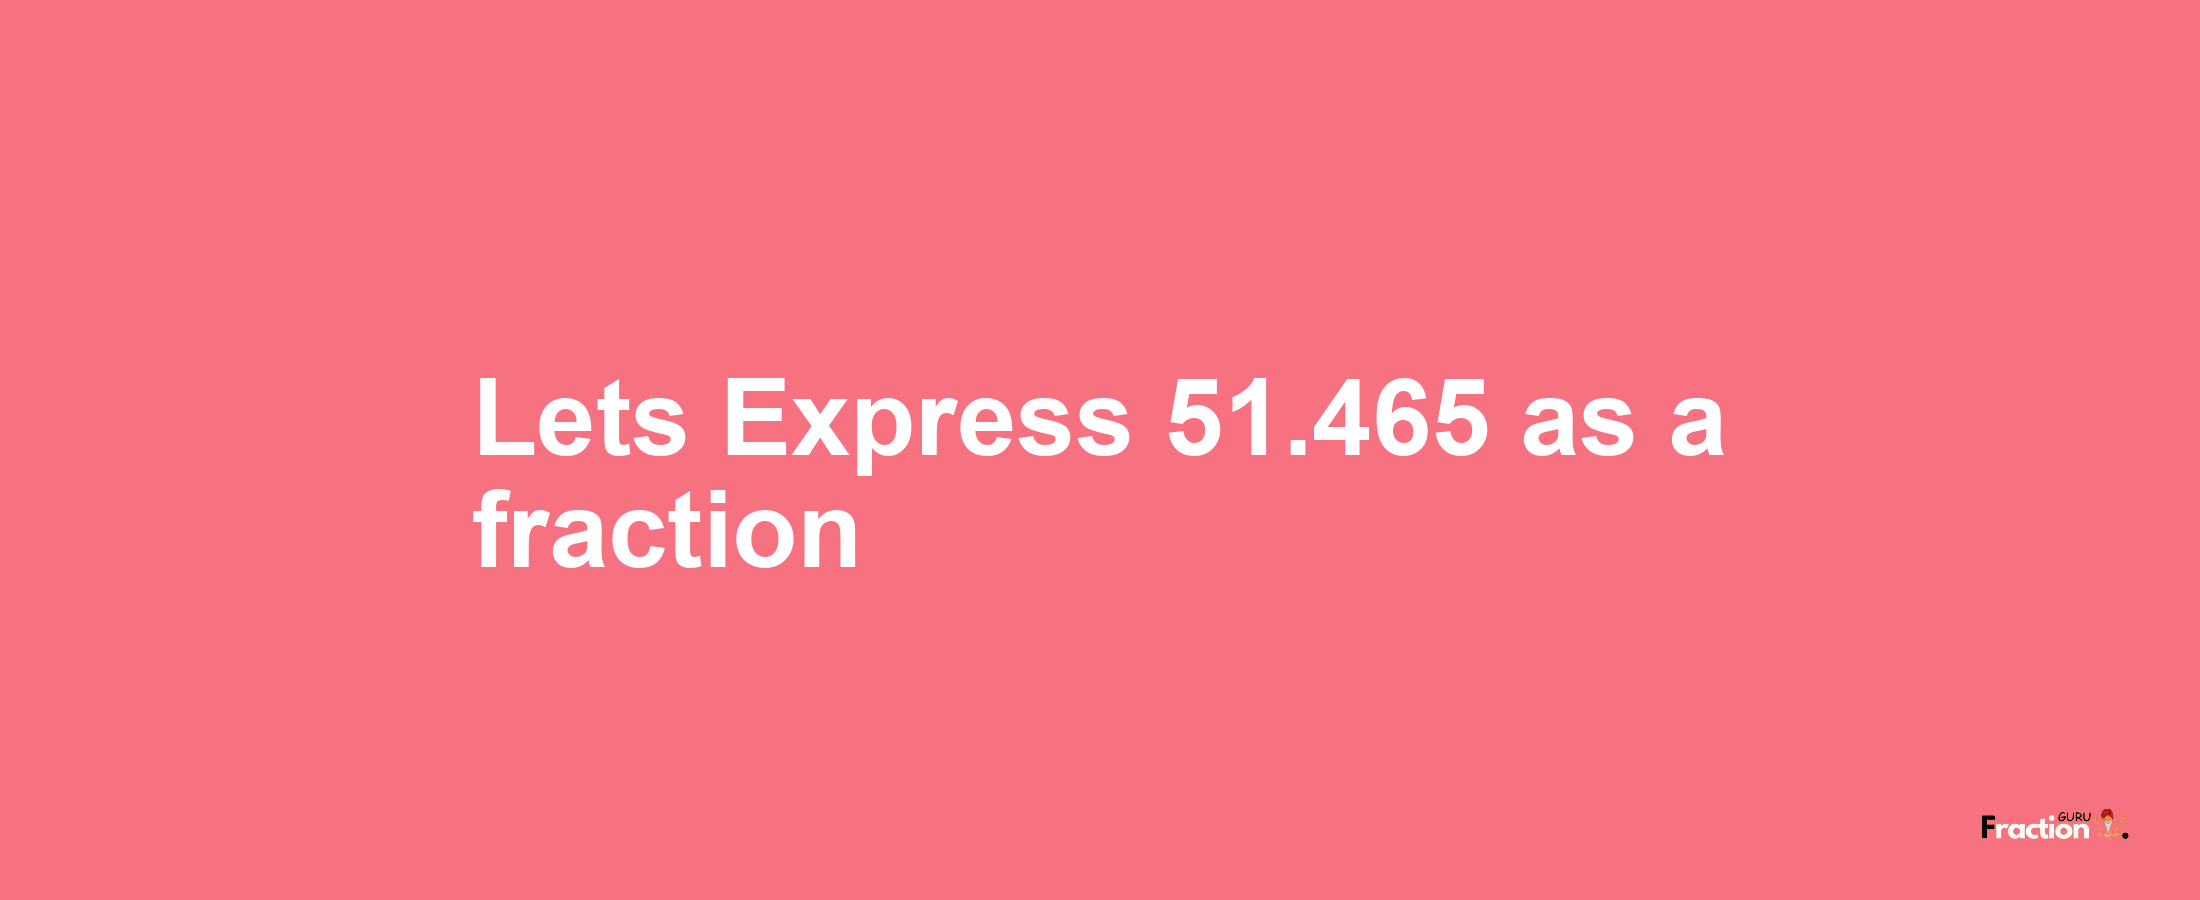 Lets Express 51.465 as afraction